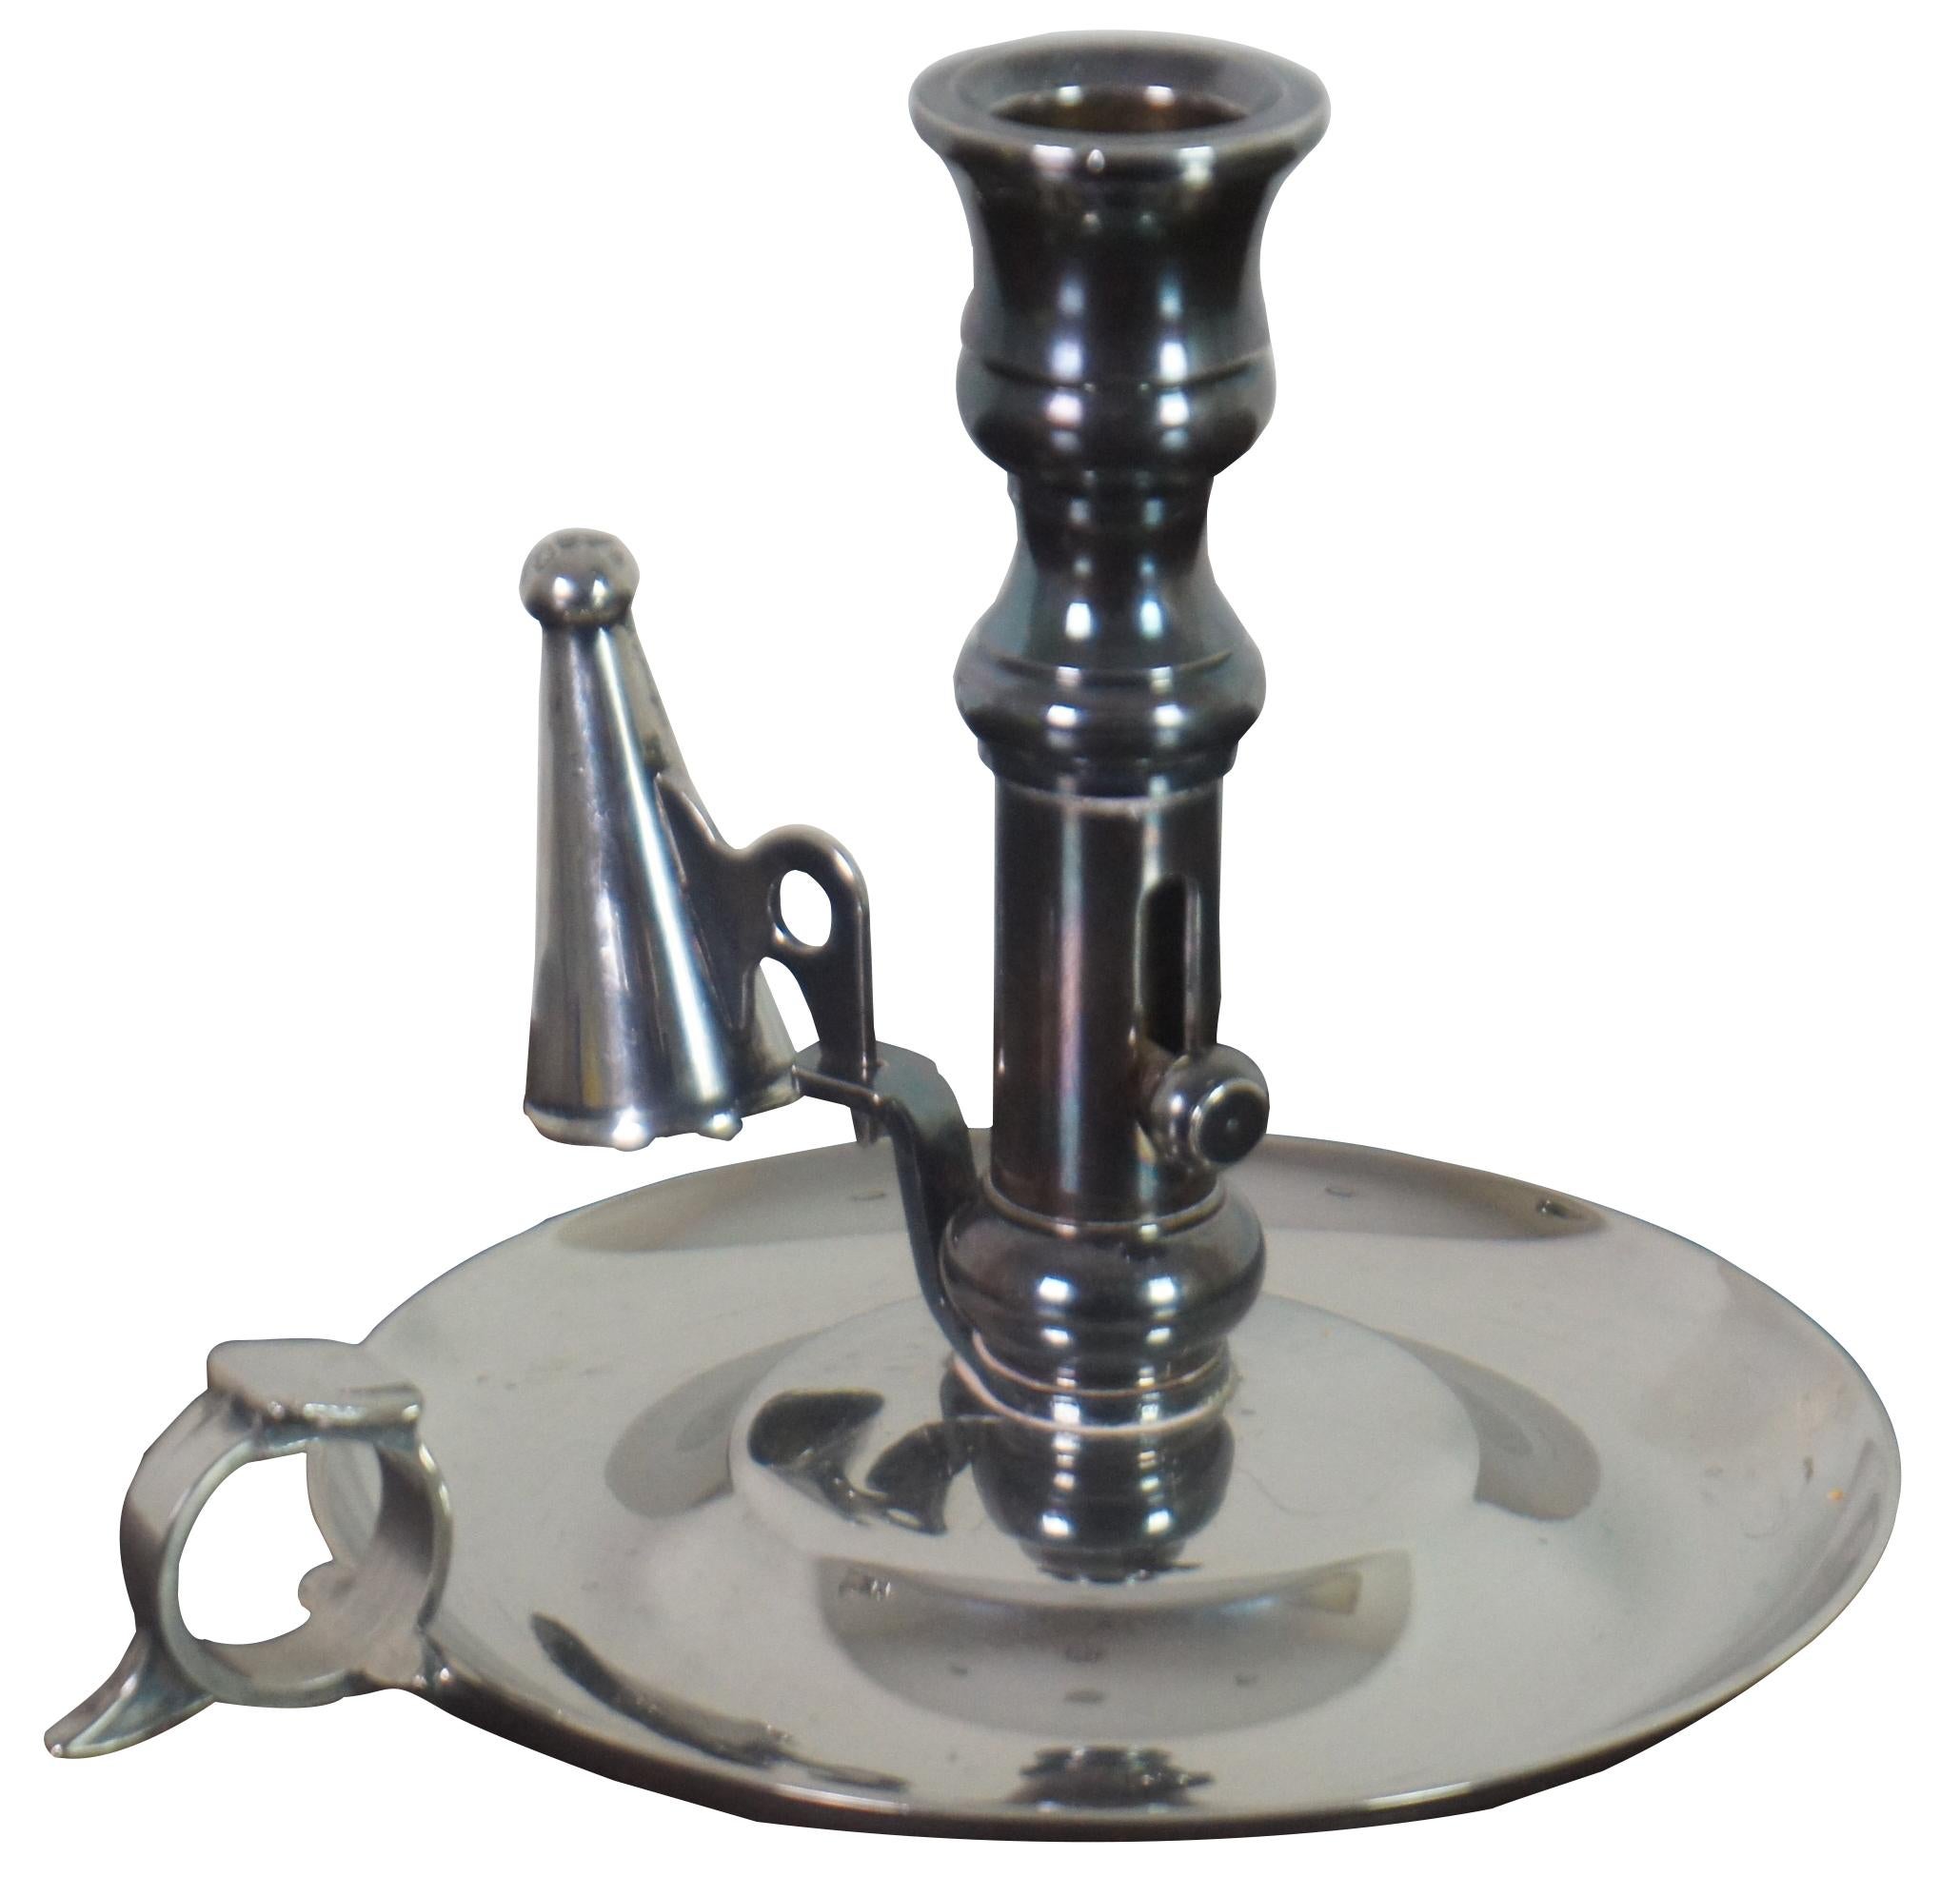 Antqiue English Georgian silver plate chamber candlestick with ring handle, snuffer, and push up mechanism to raise the candle as it burns down.
 